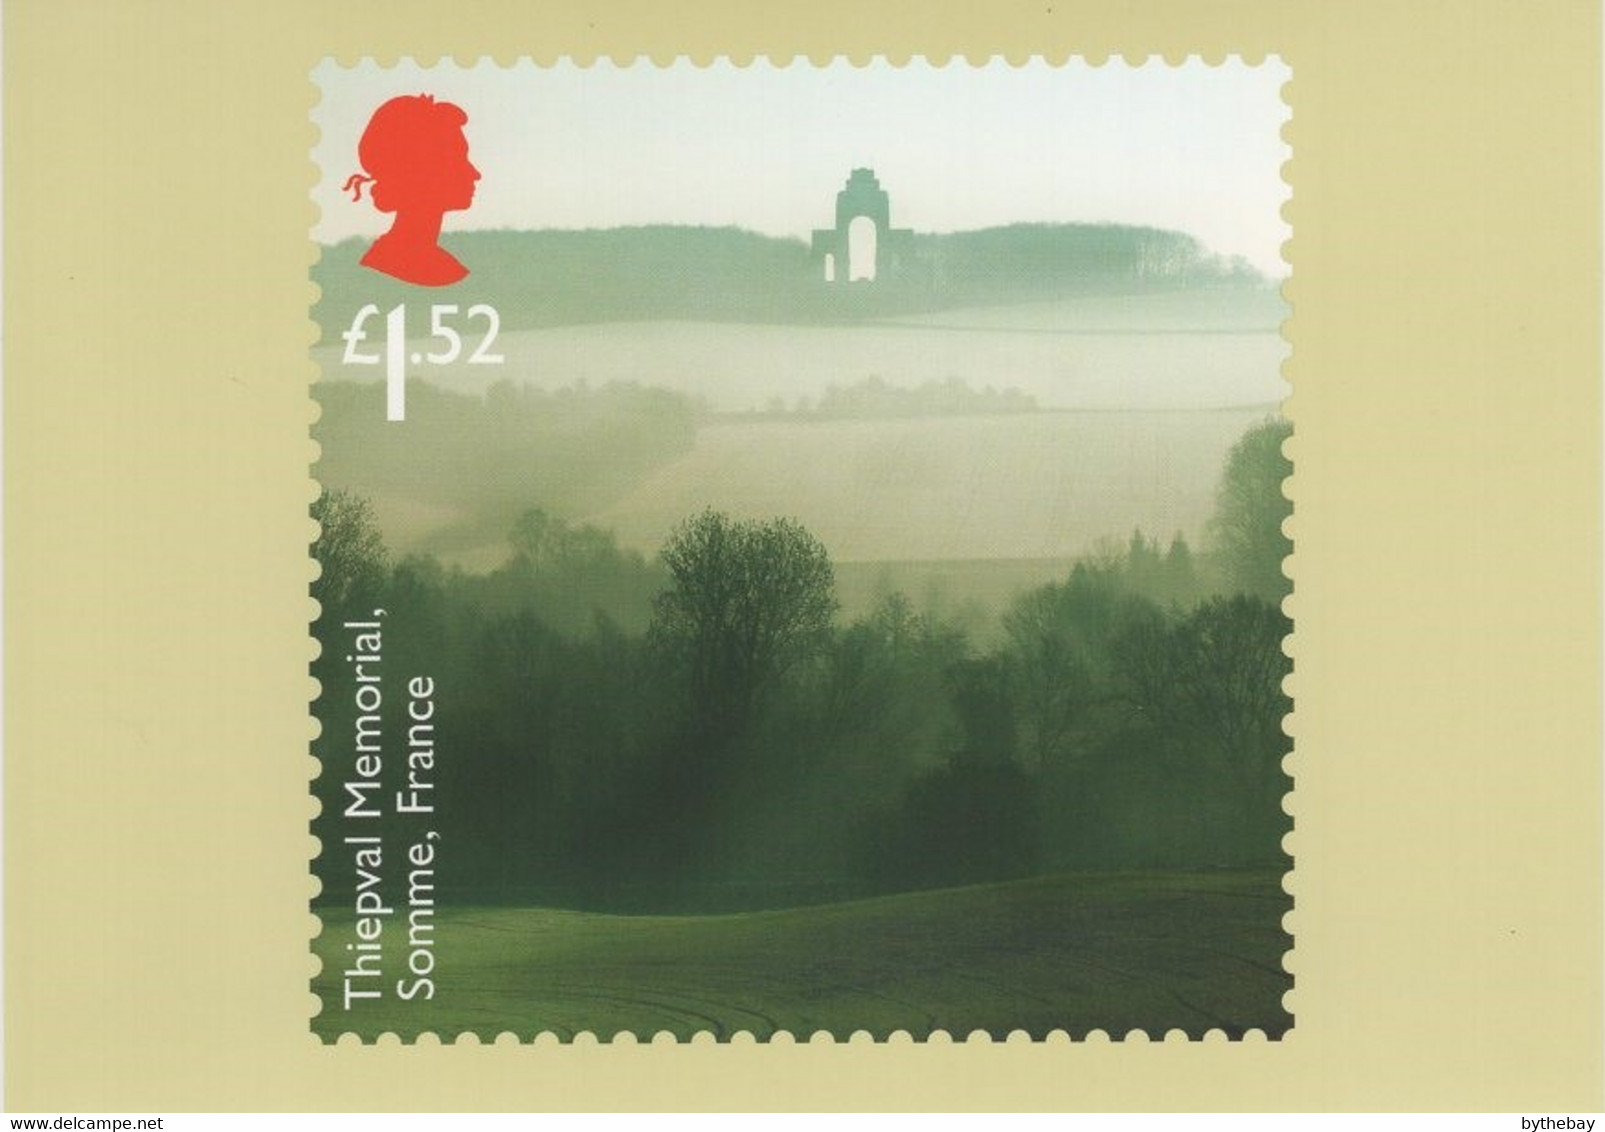 Great Britain 2016 PHQ Card Sc 3511 1.52pd Thiepval Memorial, Somme, France - PHQ Cards